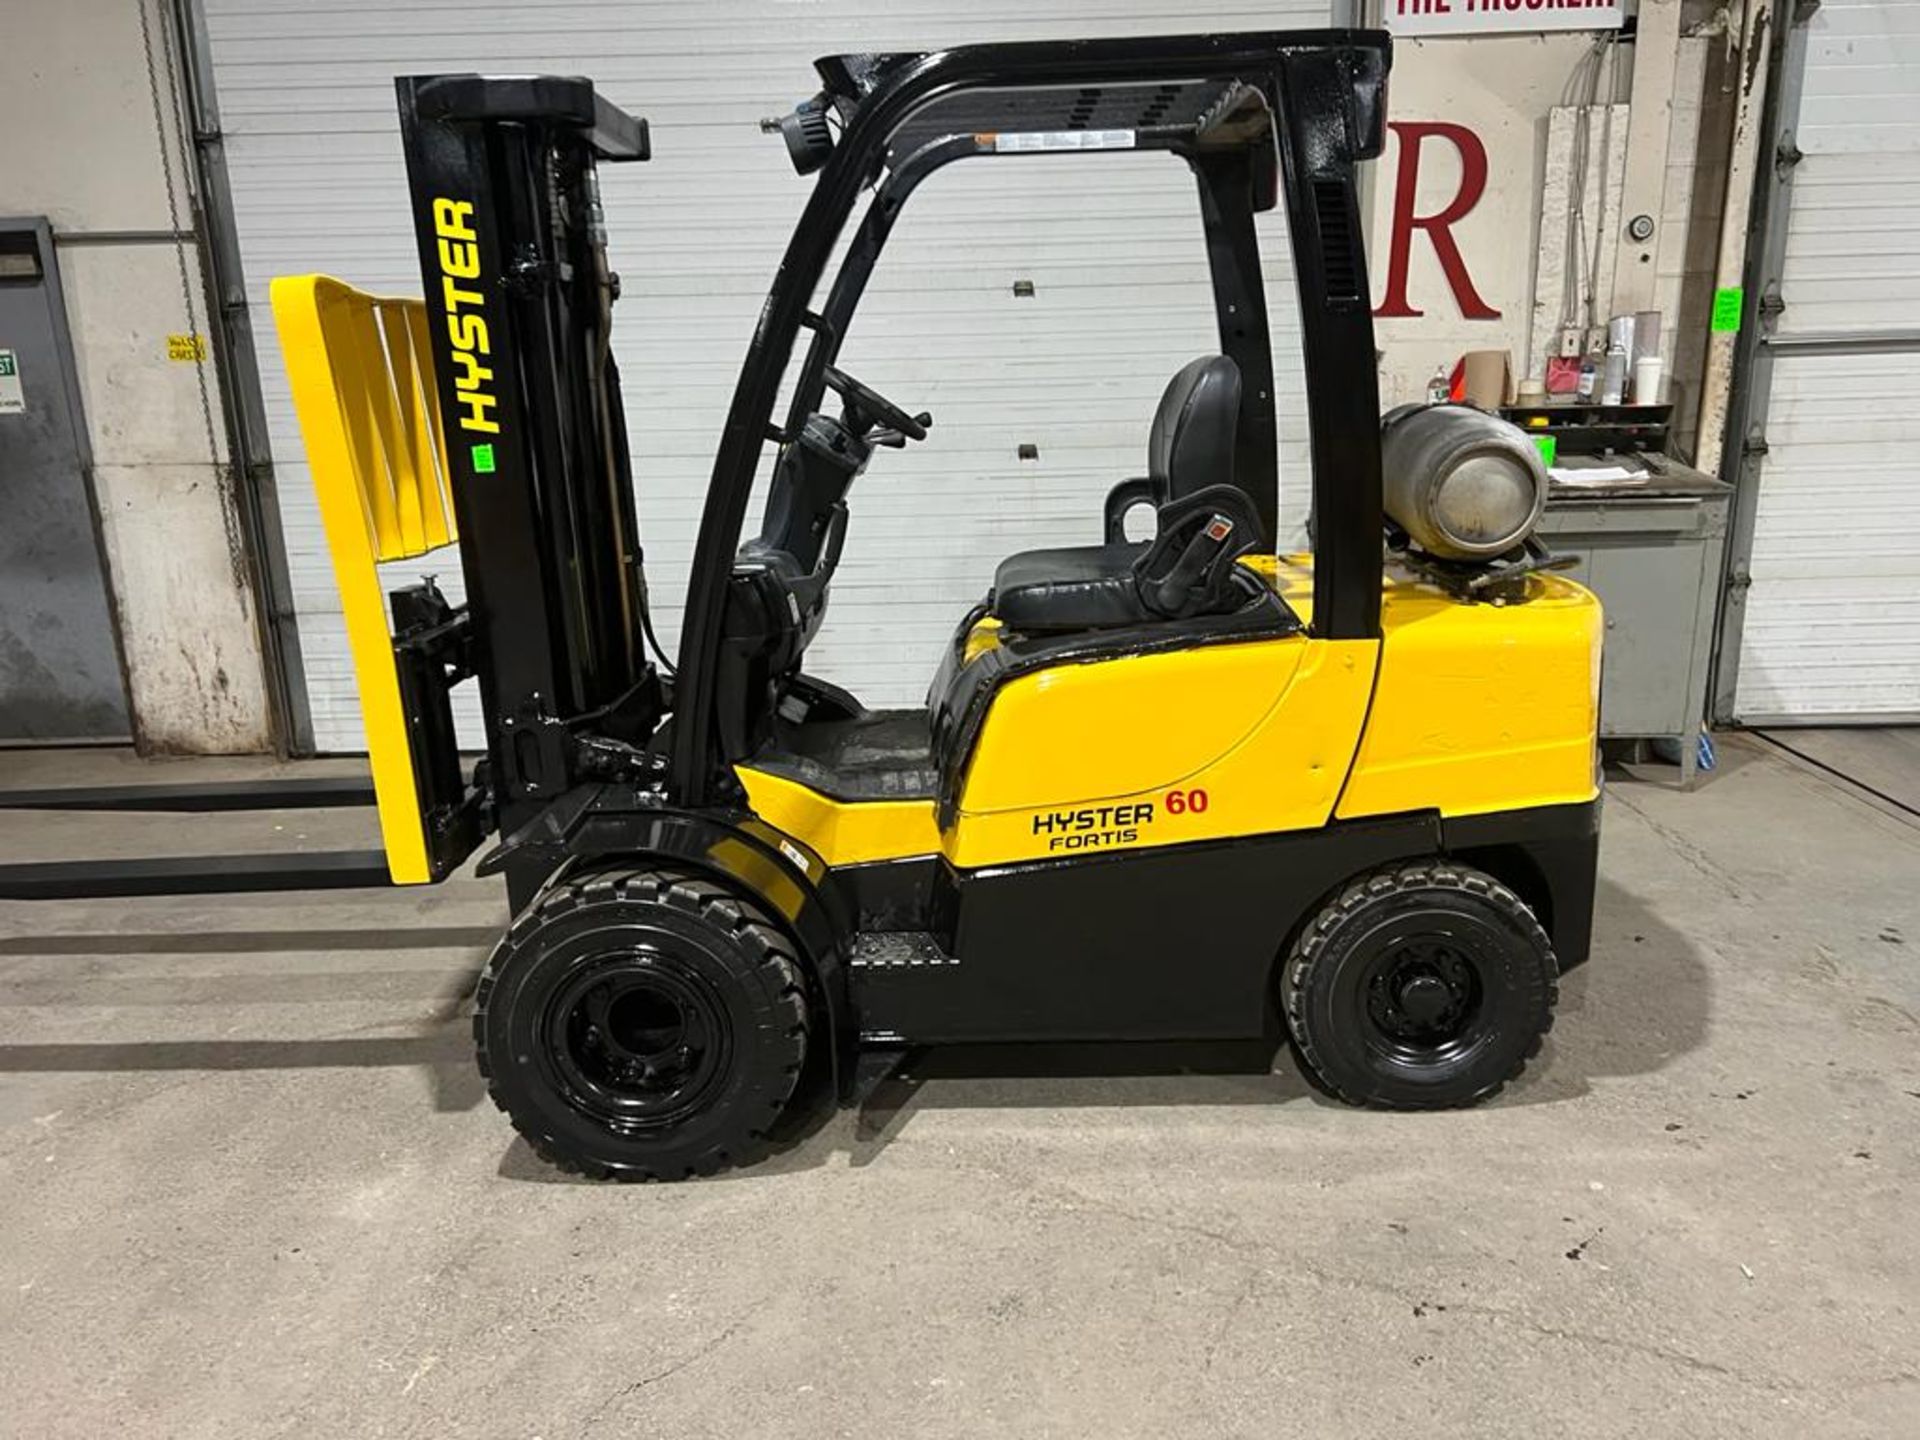 NICE 2011 Hyster 60 - 6,000lbs Capacity OUTDOOR Forklift DUAL FRONT TIRES LPG (propane) 60" forks